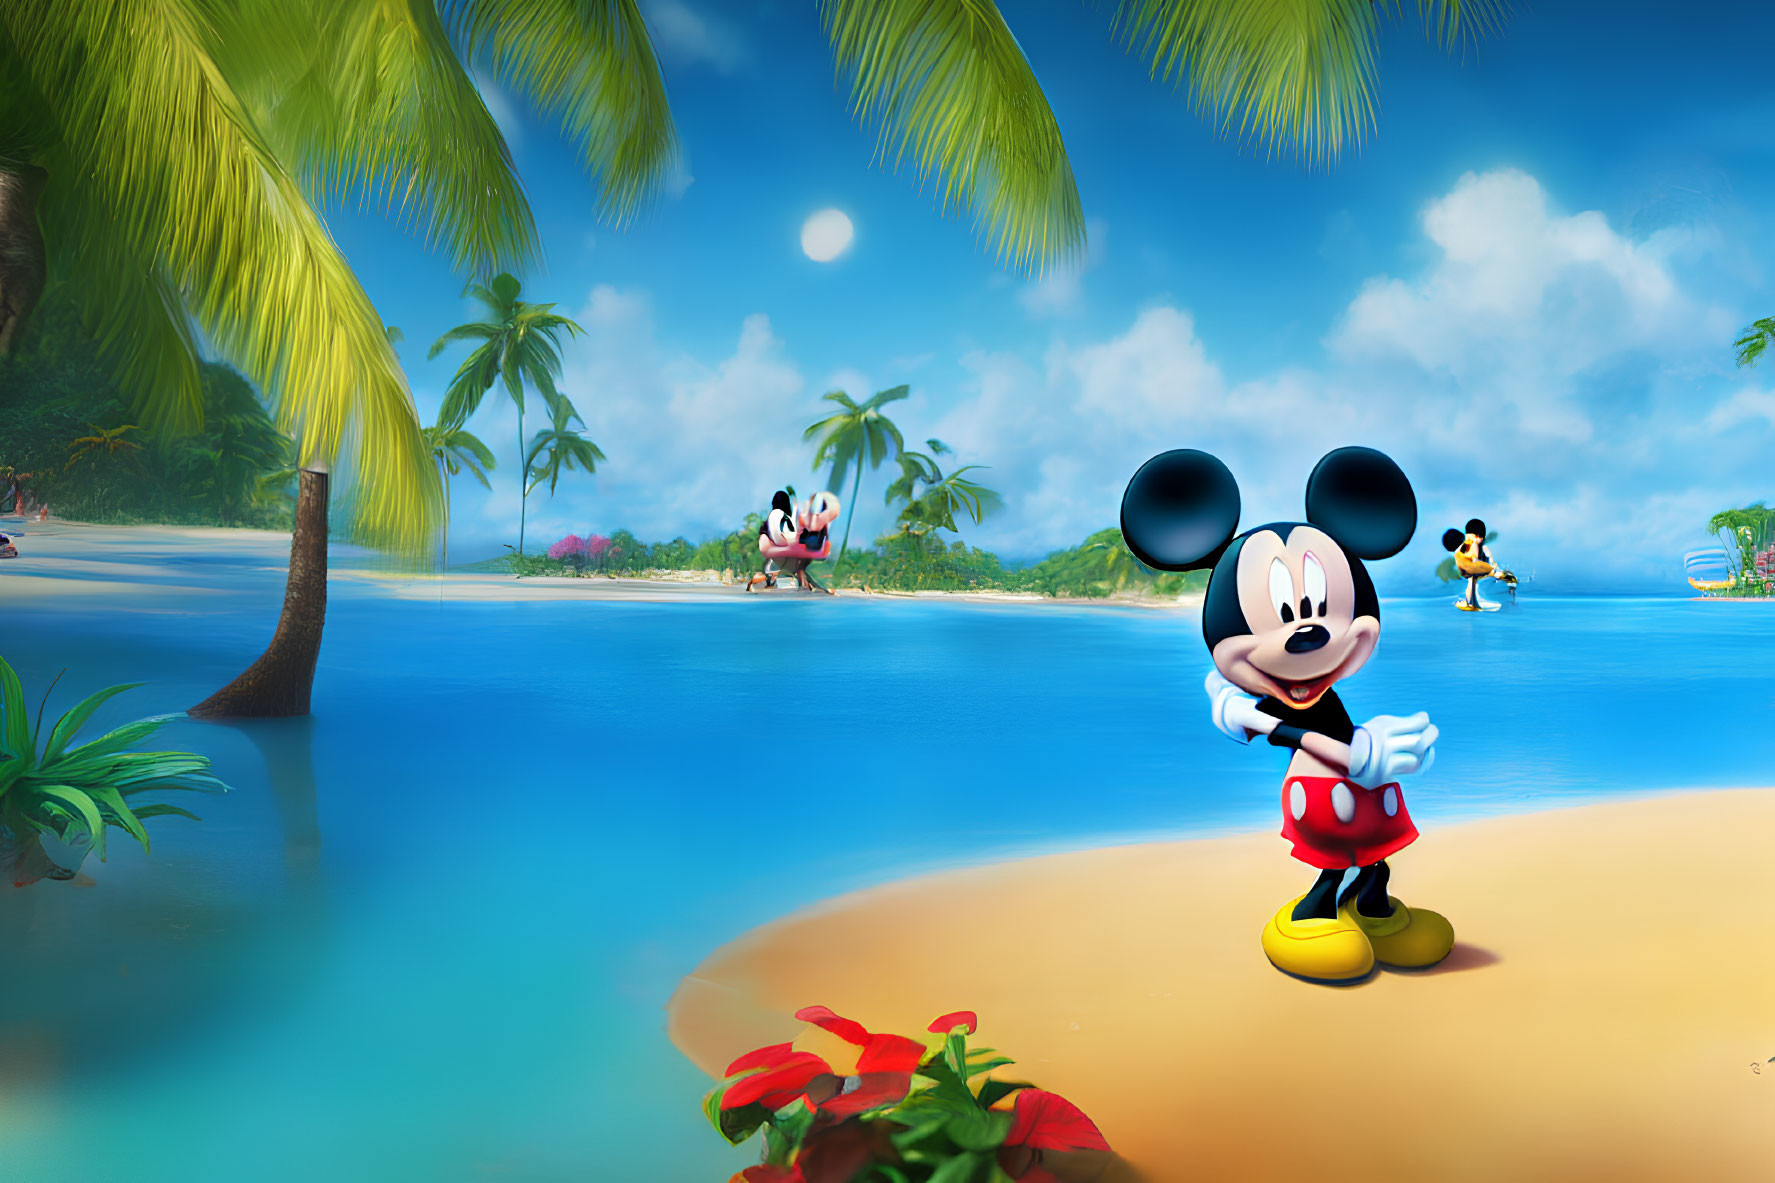 Sunny beach scene with palm trees, blue water, Goofy, and Minnie Mouse